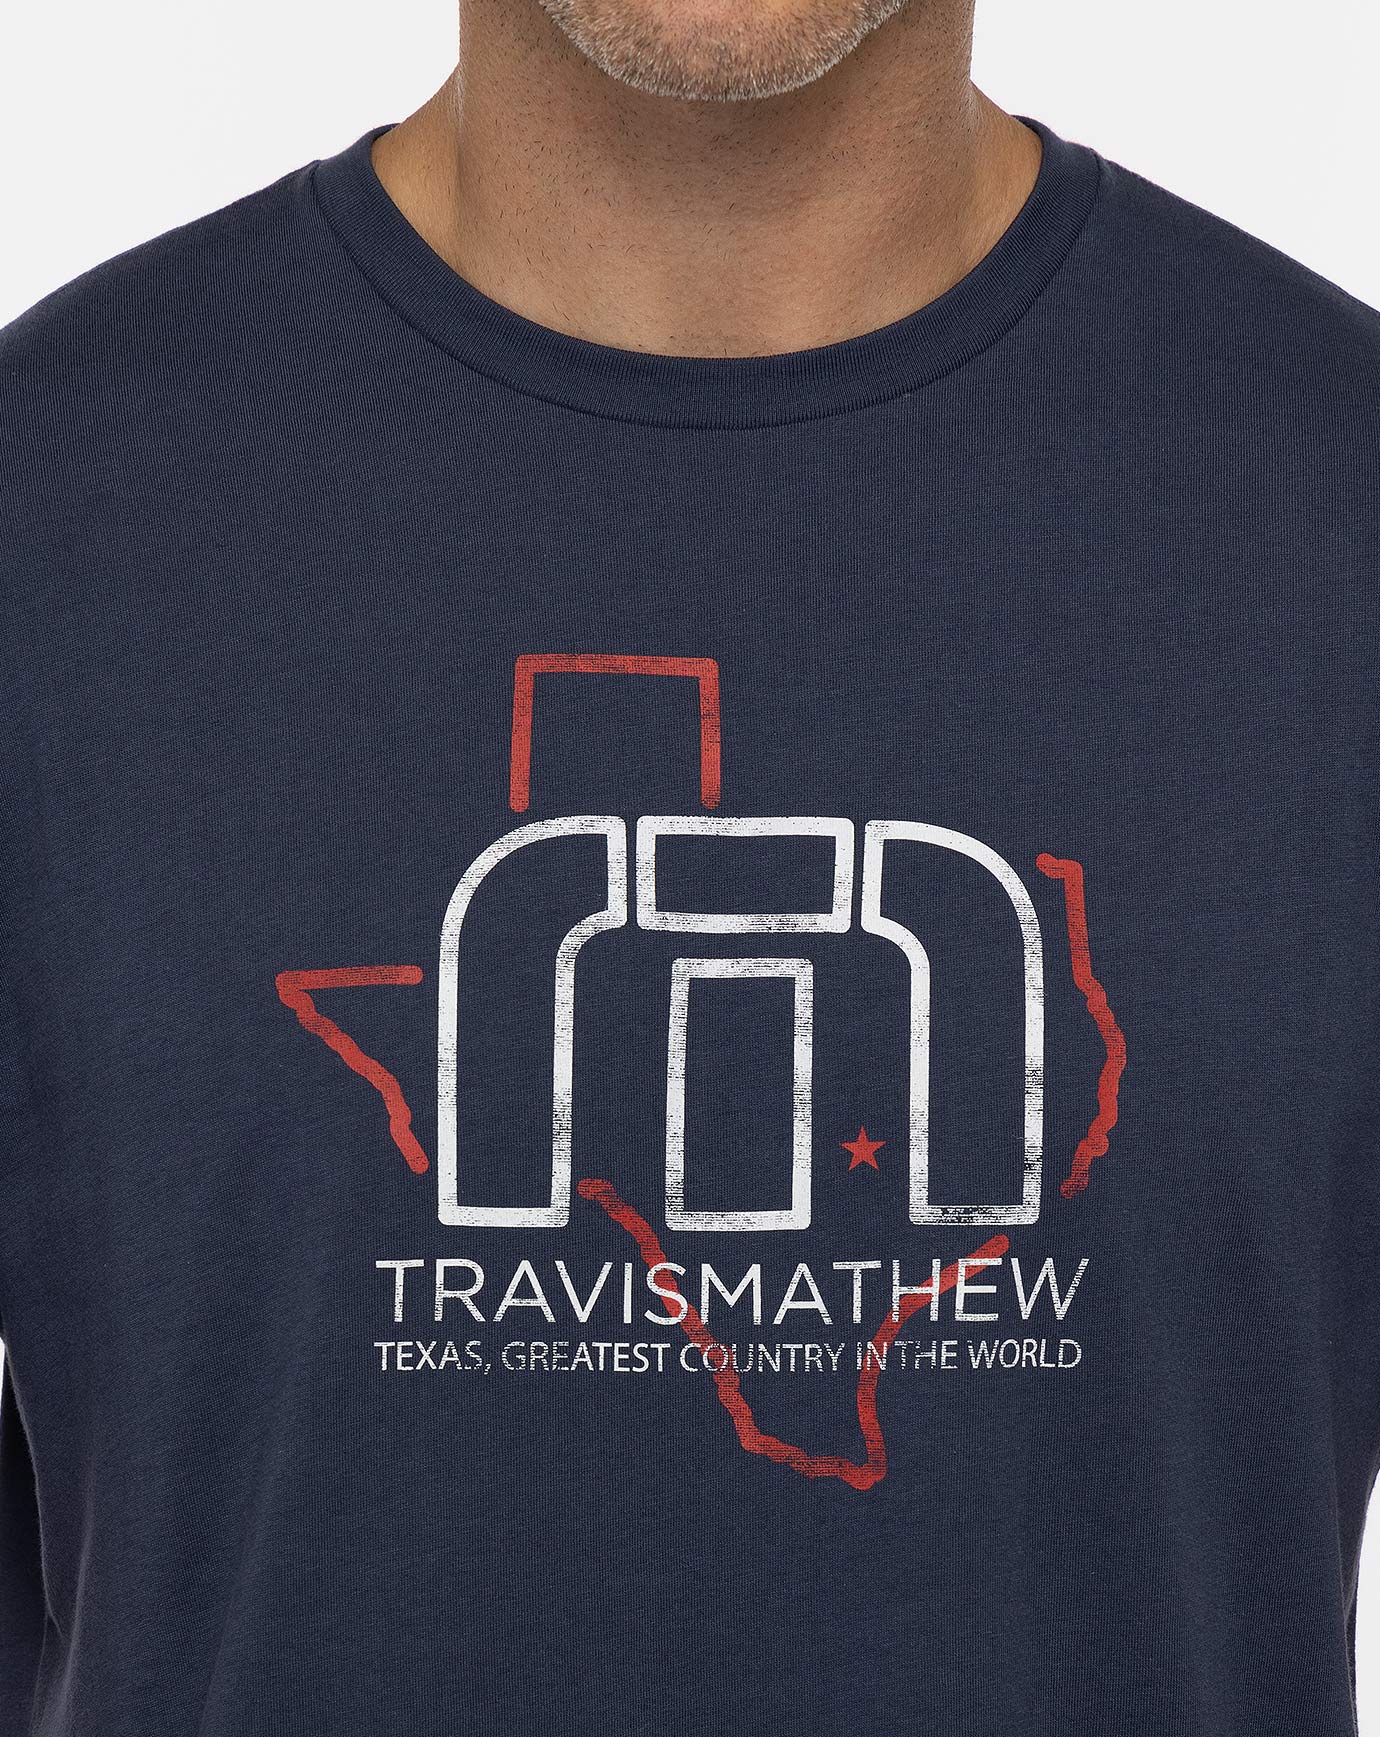 Greatest Country in the World (Texas) T-Shirt